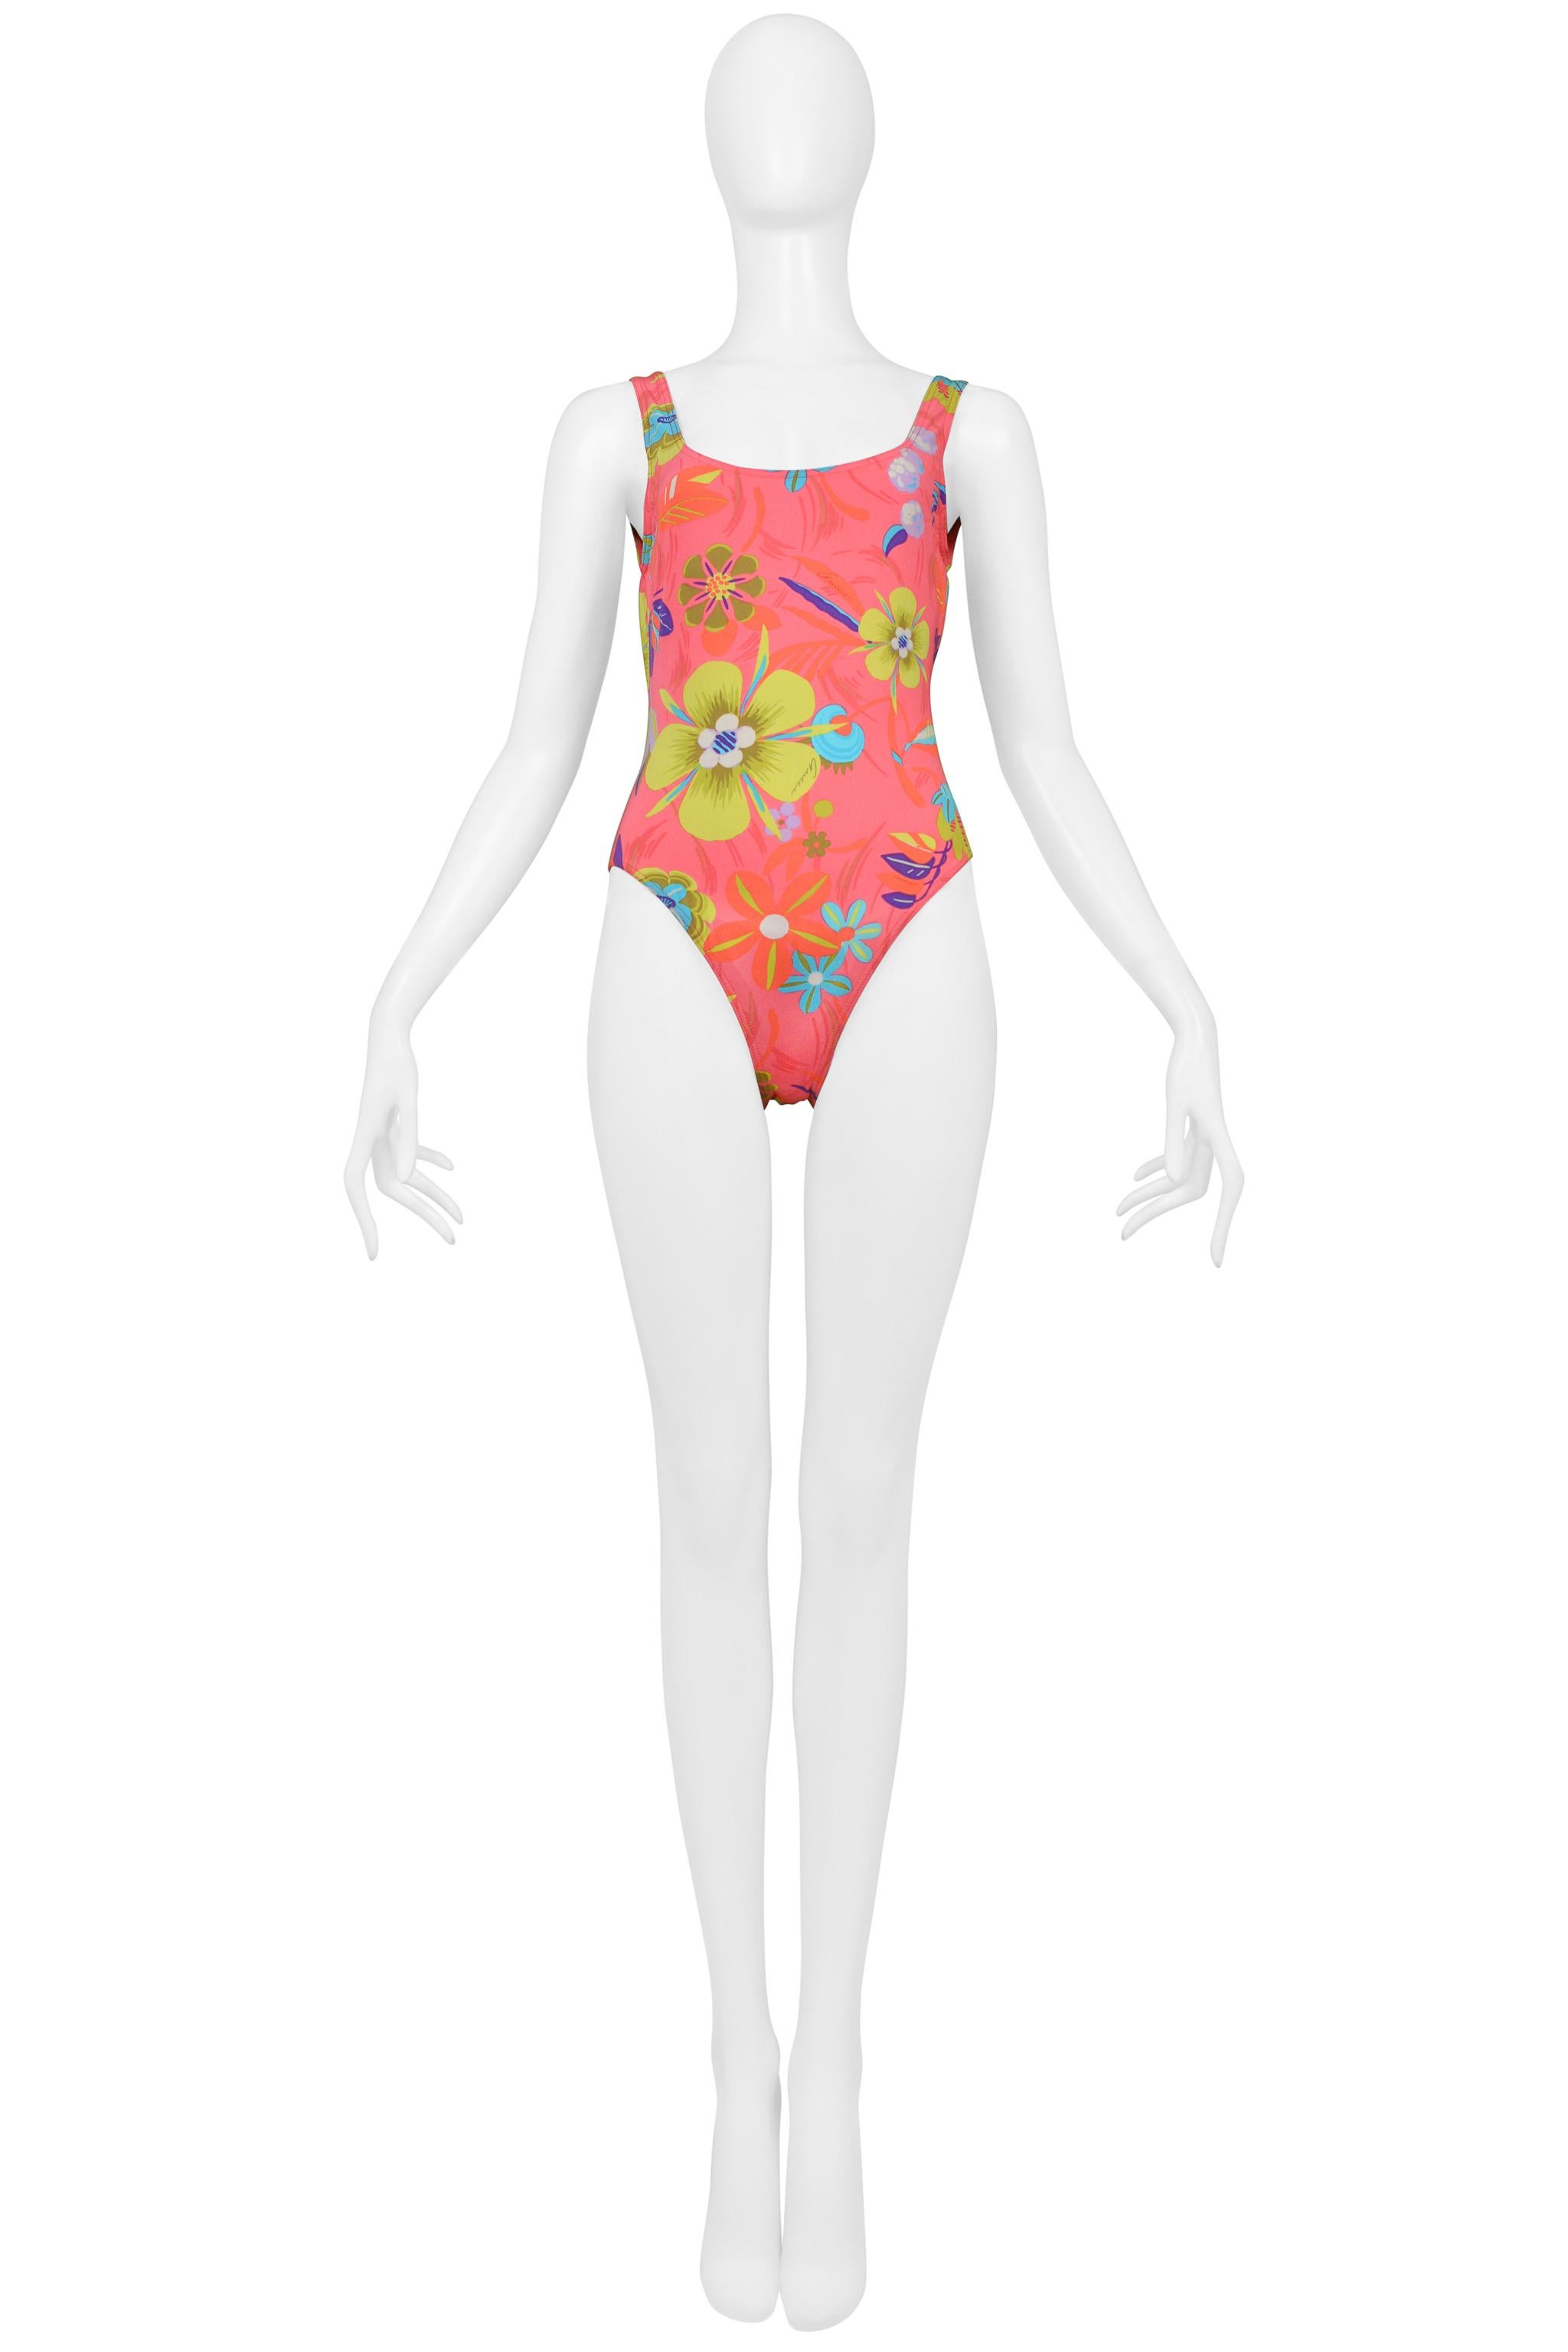 Resurrection Vintage is excited to offer a vintage Gucci by Tom Ford pink floral print swimsuit featuring decorative floral pattern, an open back, scoop neck, one piece, and high rise sides. 

Gucci by Tom Ford
Size Small
79% Nylon, 21% Spandex
1999